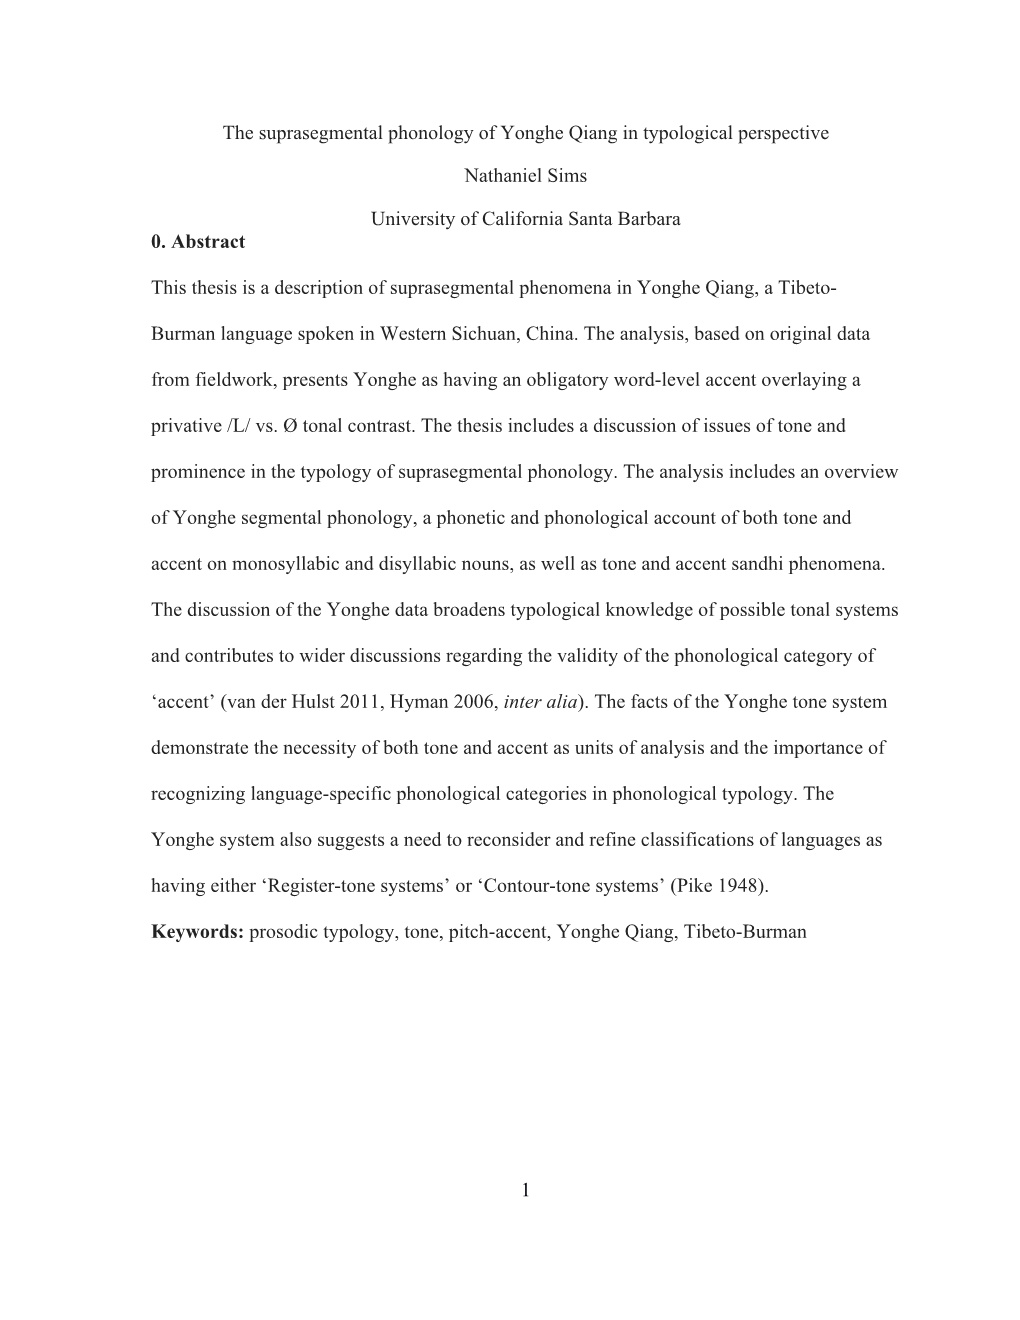 The Suprasegmental Phonology of Yonghe Qiang in Typological Perspective